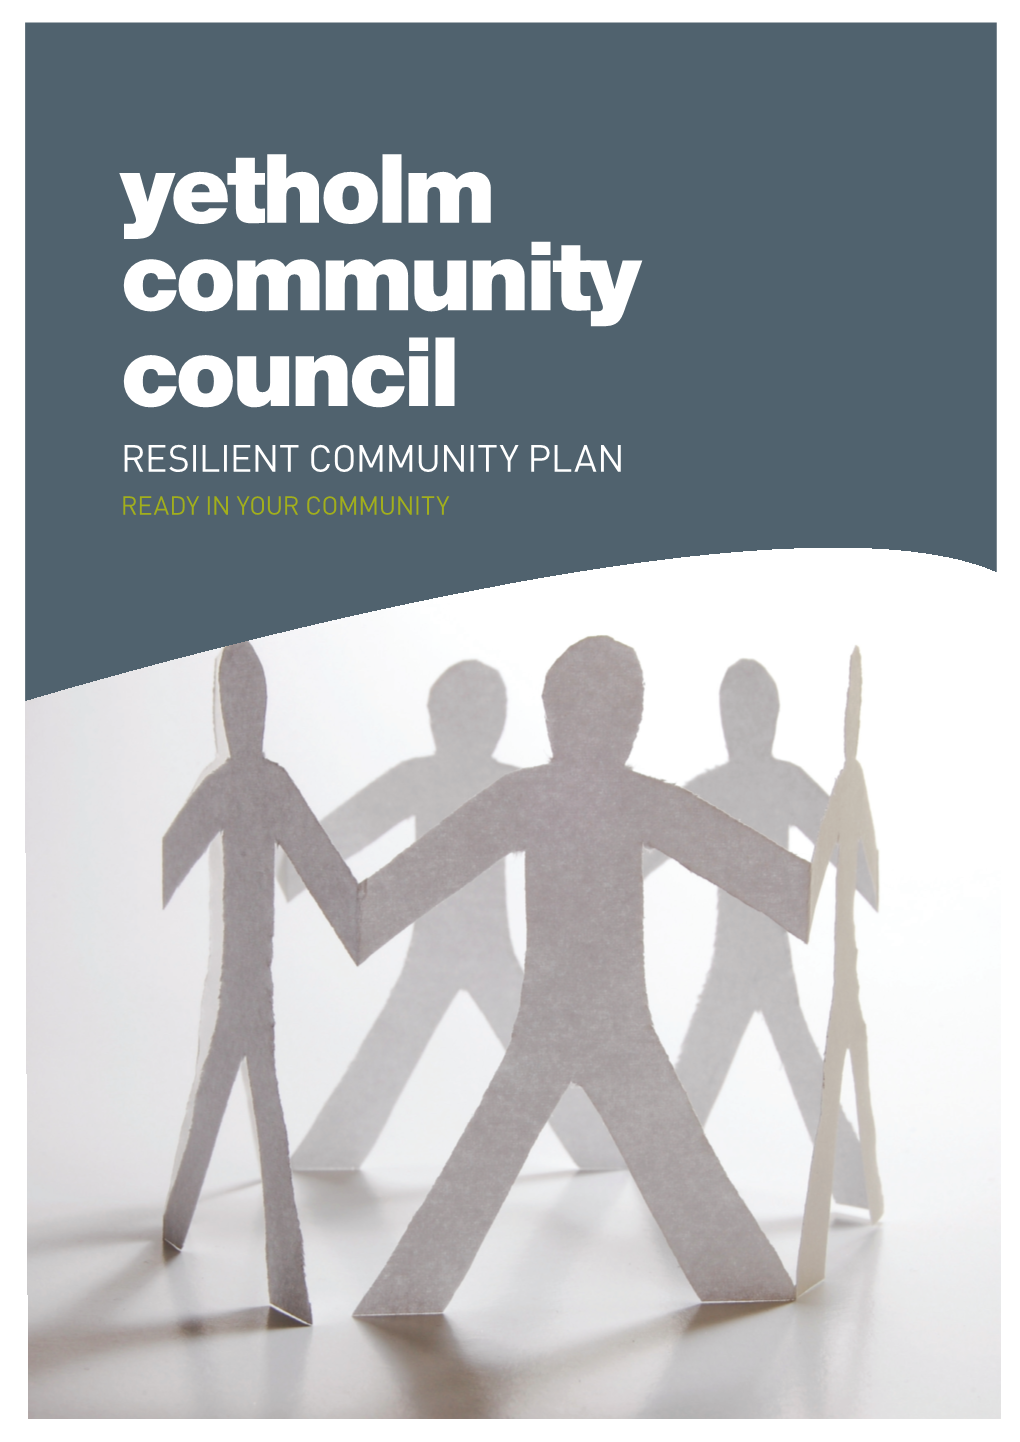 Yetholm Community Council Resilient Community Plan Ready in Your Community Contents Yetholm Community Council